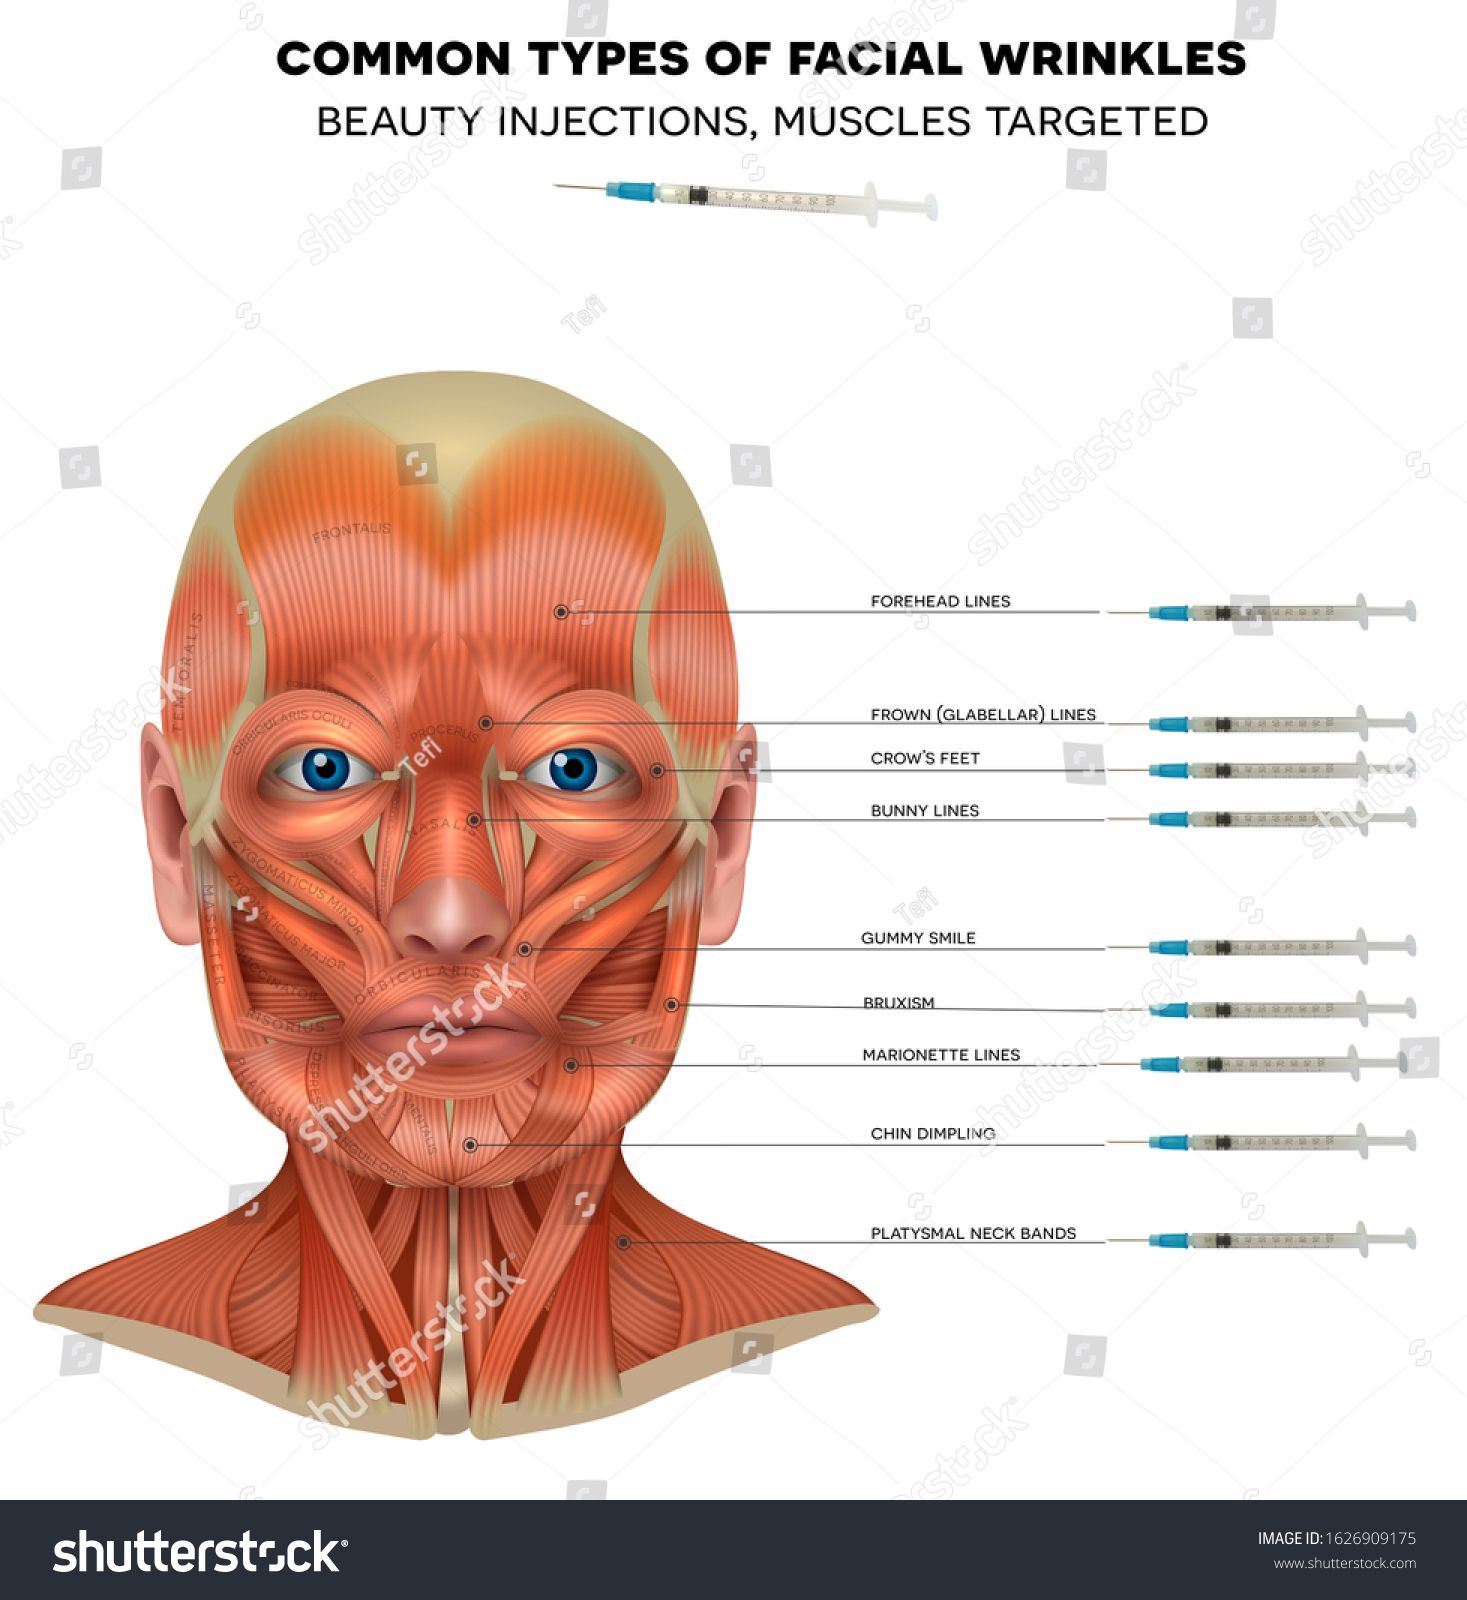 Common Types Facial Wrinkles Treatment Male Stock Vector (Royalty Free) 1626909175 - Common Types Facial Wrinkles Treatment Male Stock Vector (Royalty Free) 1626909175 -   12 beauty Treatments poster ideas